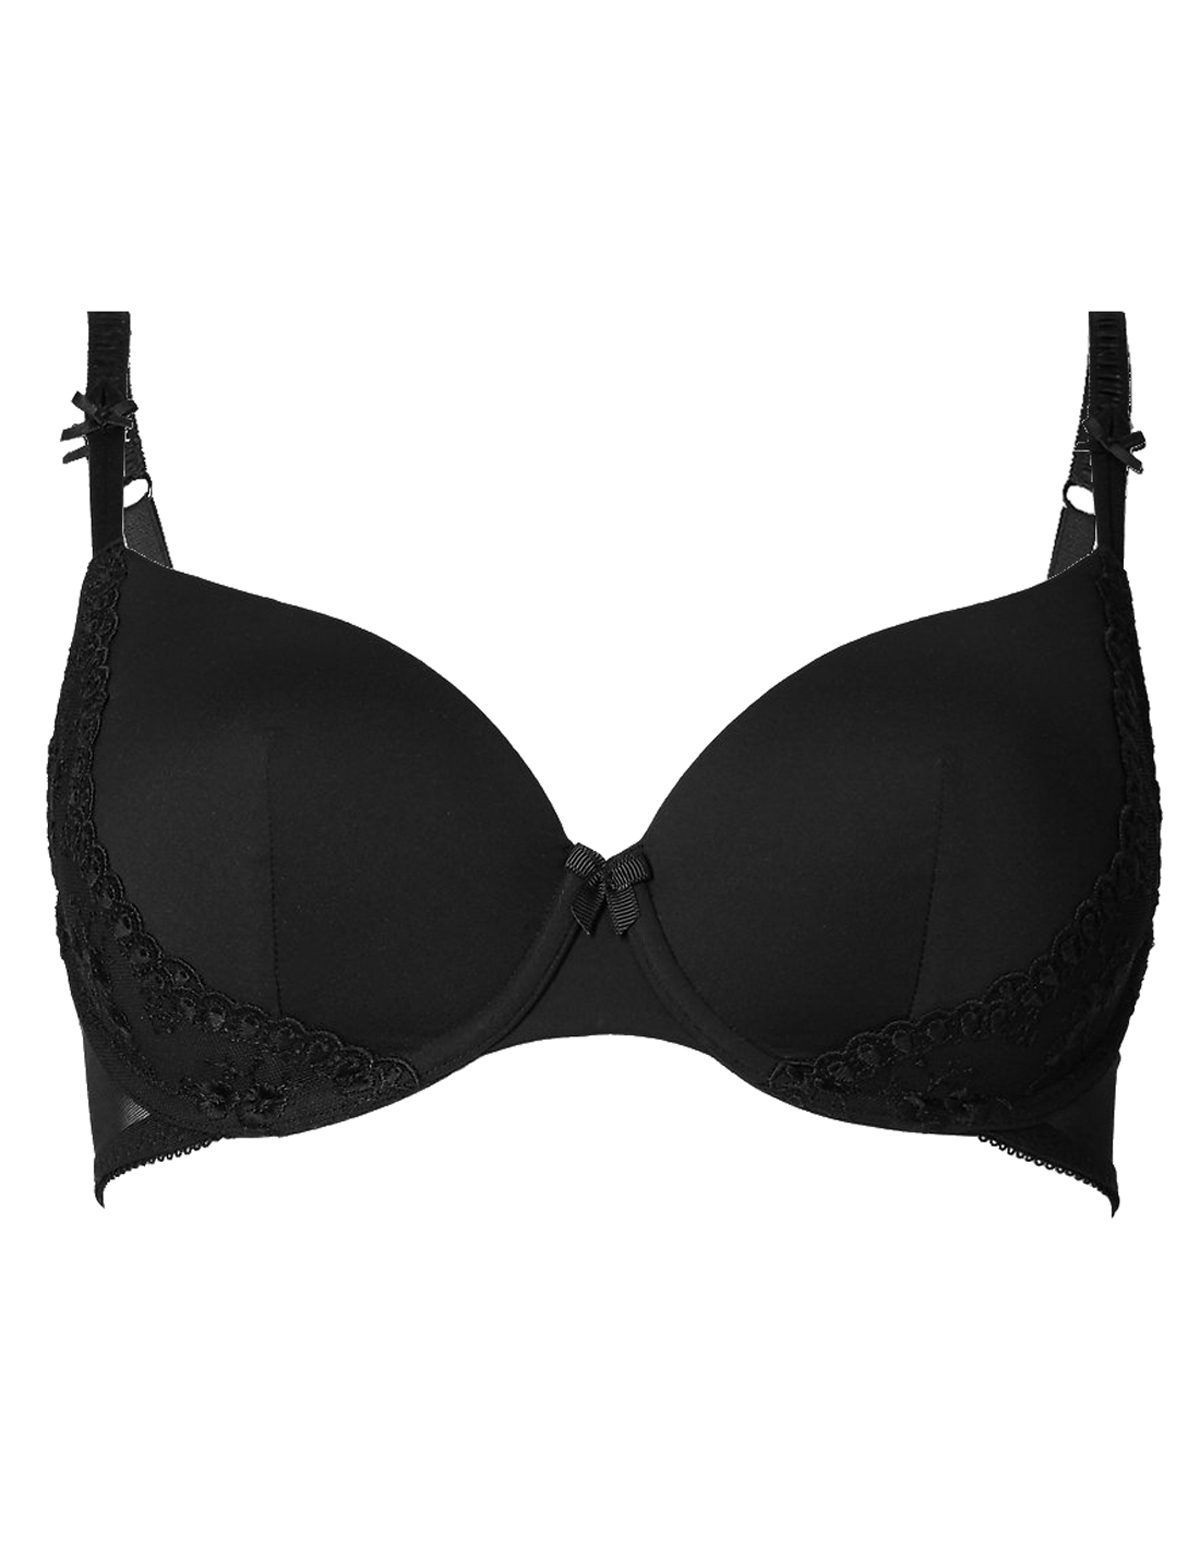 Marks and Spencer - - M&5 BLACK Lace Panel Padded Plunge Bra - Size 32 ...